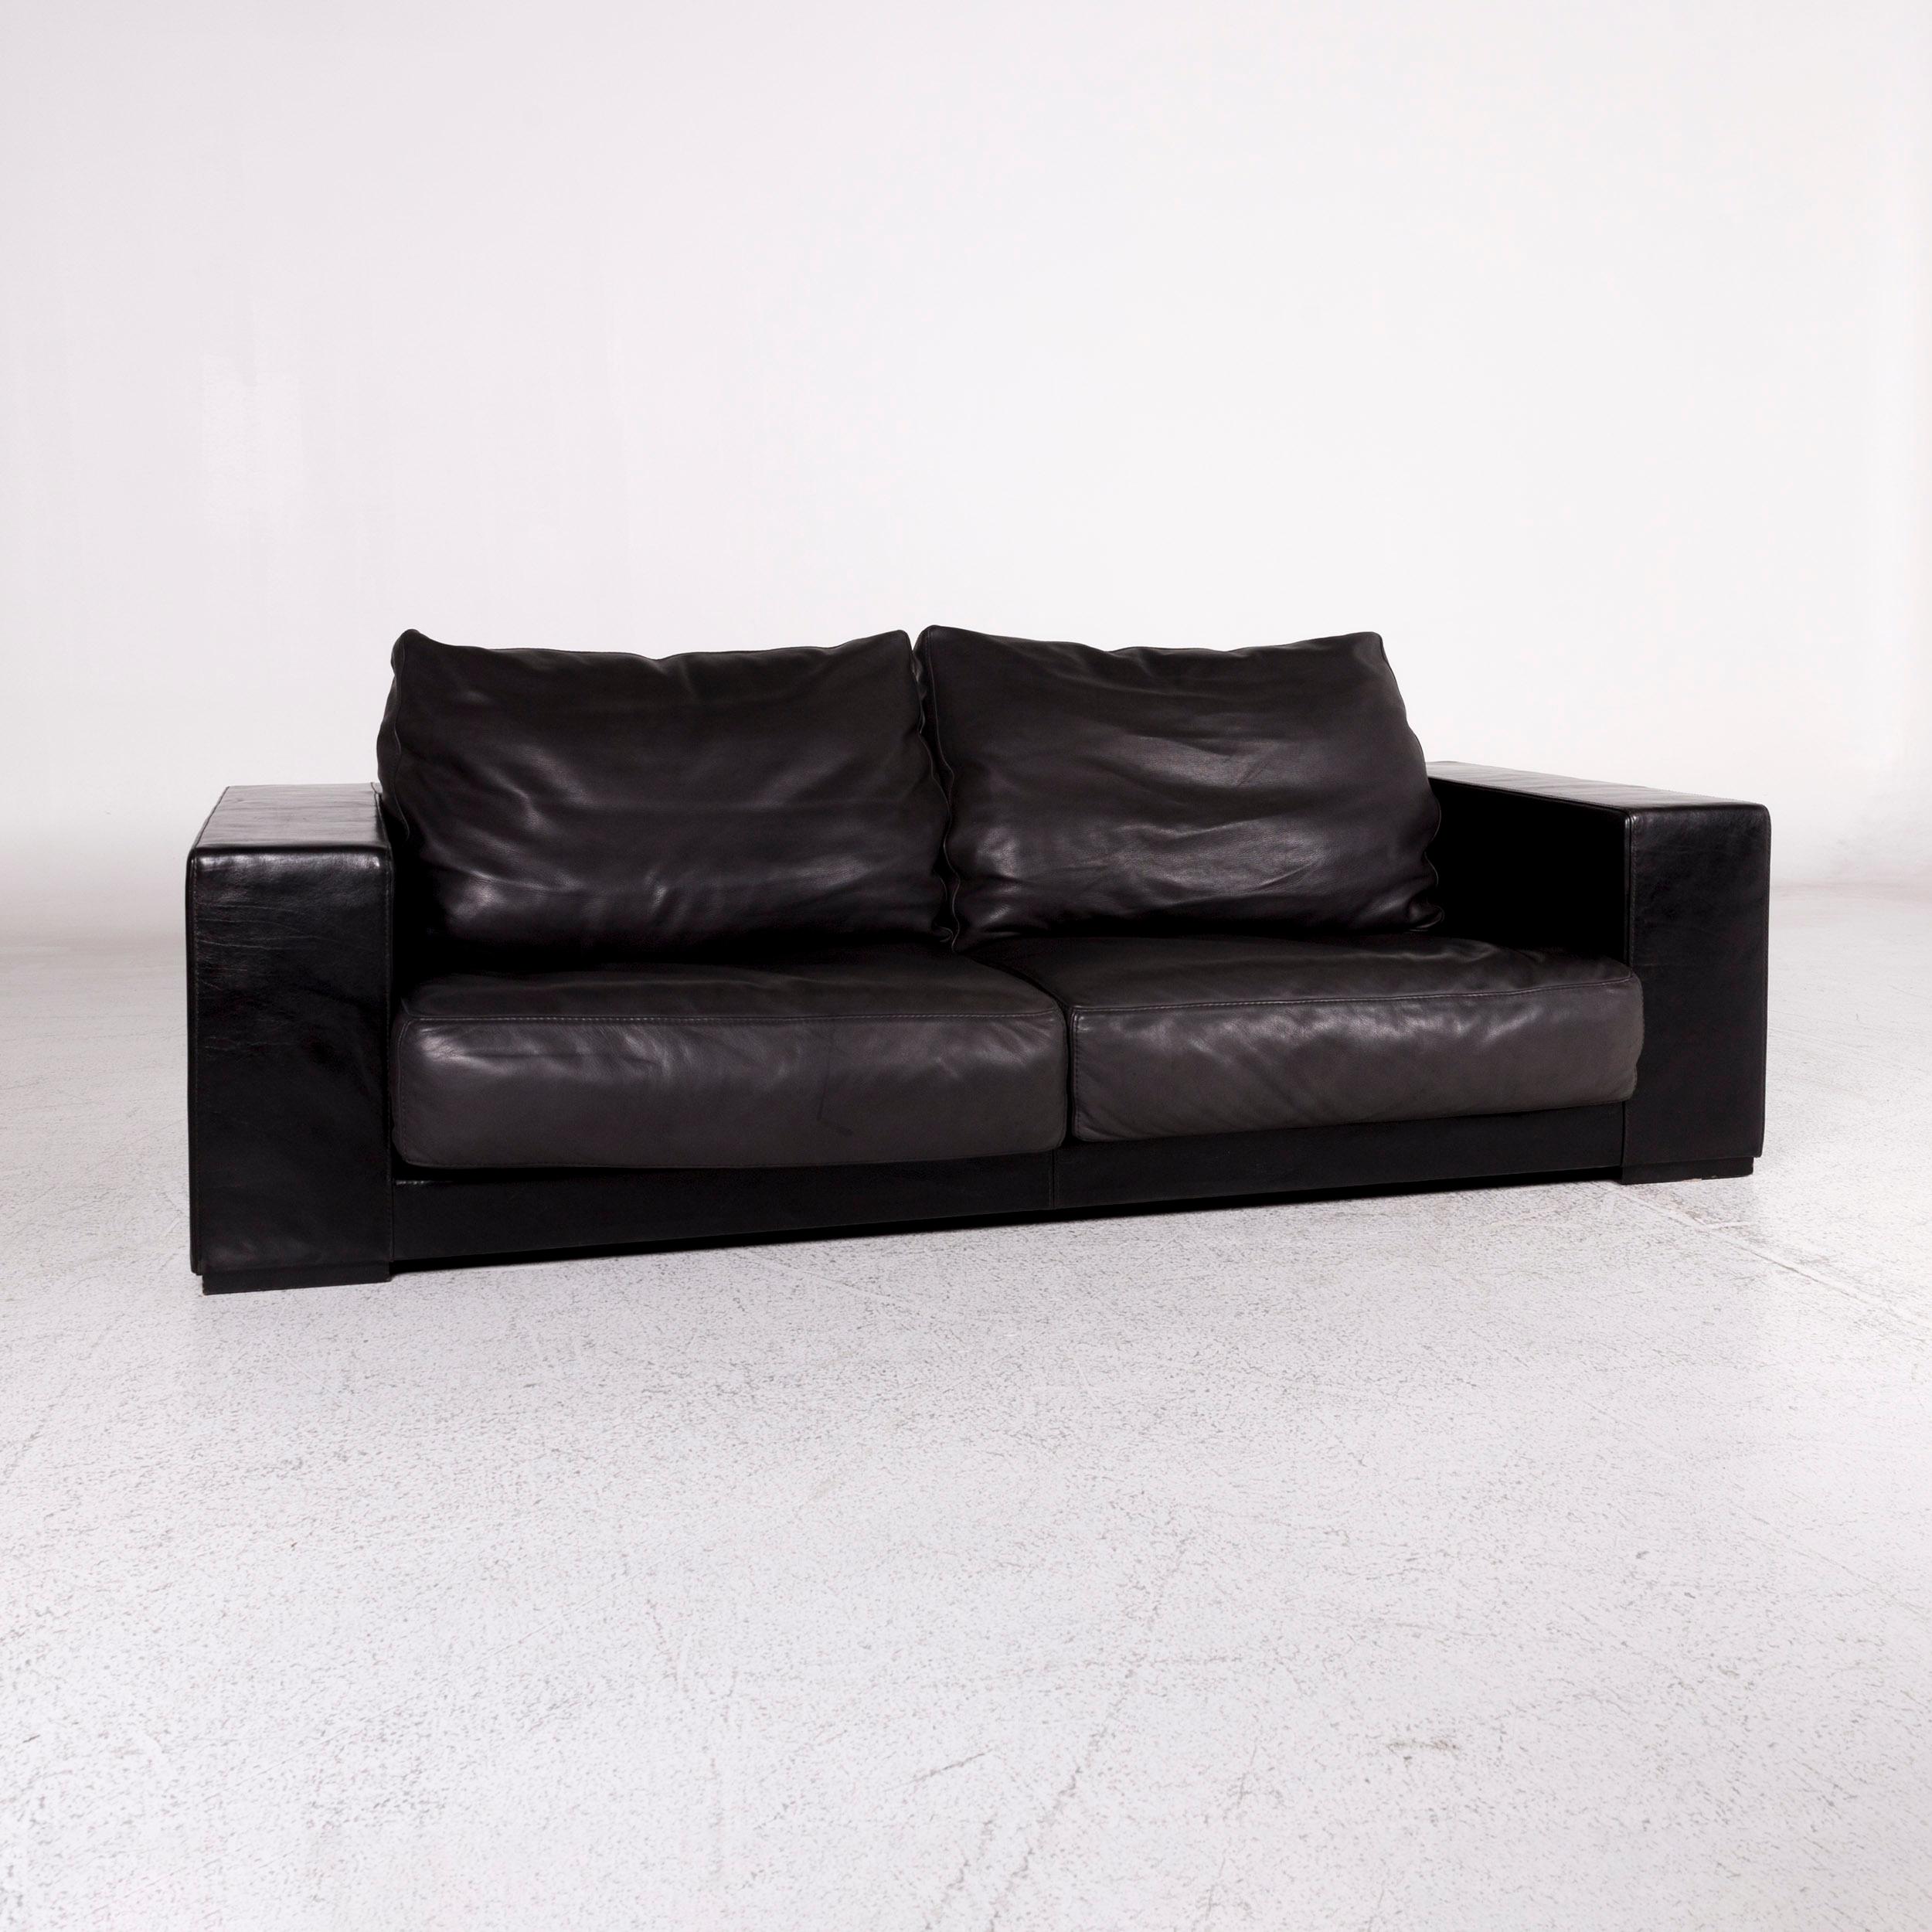 We bring to you a Baxter Budapest leder sofa schwarz Zweisitzer couch.

 Product measurements in centimeters:
 
Depth: 117
Width: 241
Height: 83
Seat-height: 37
Rest-height: 61
Seat-depth: 58
Seat-width: 187
Back-height: 47.

 